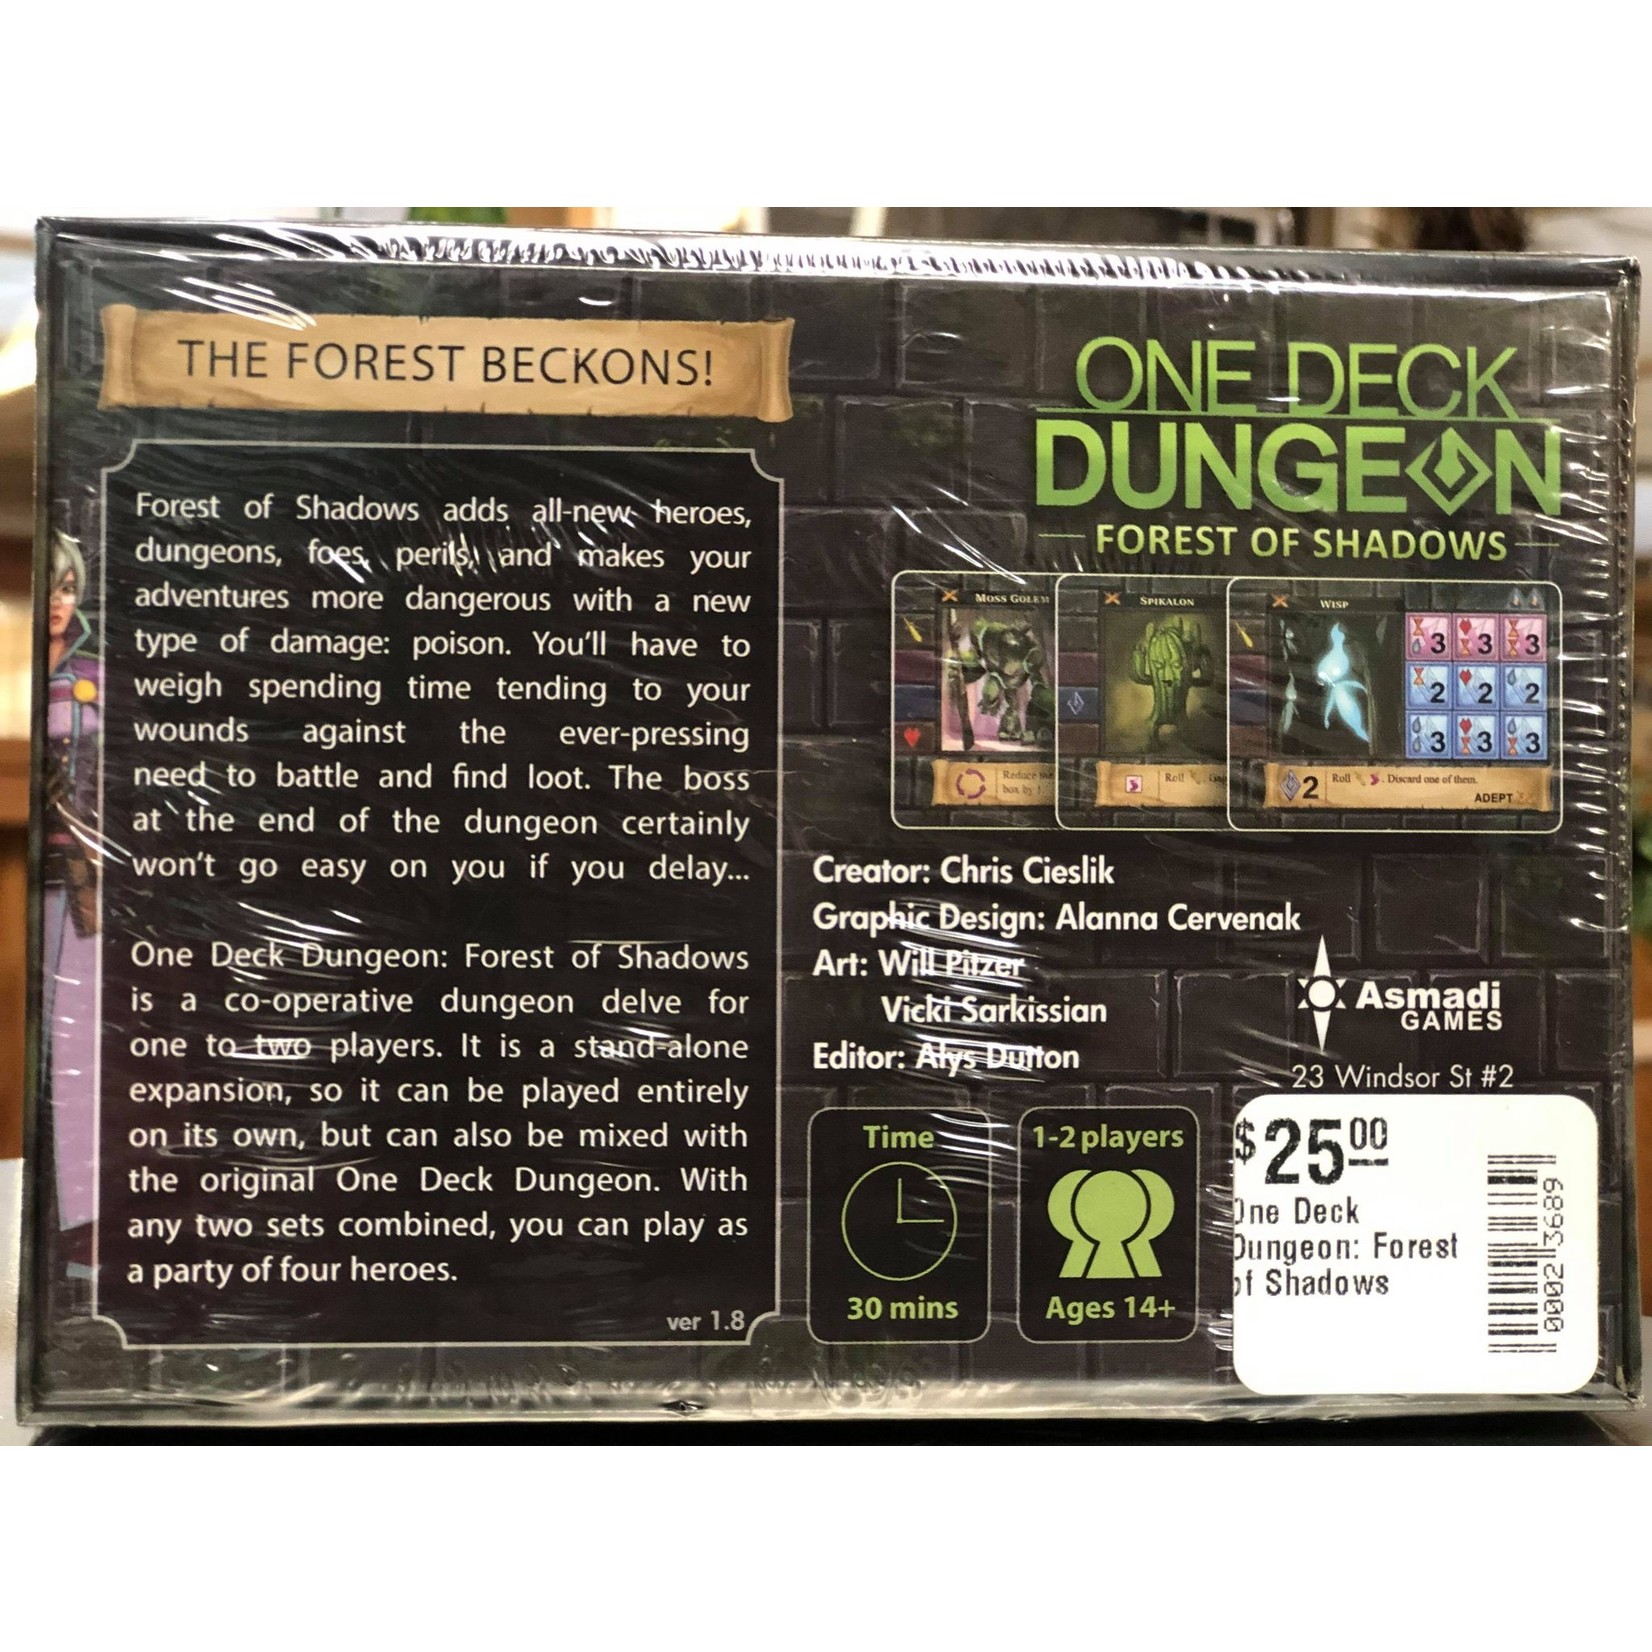 One Deck One Deck Dungeon: Forest of Shadows